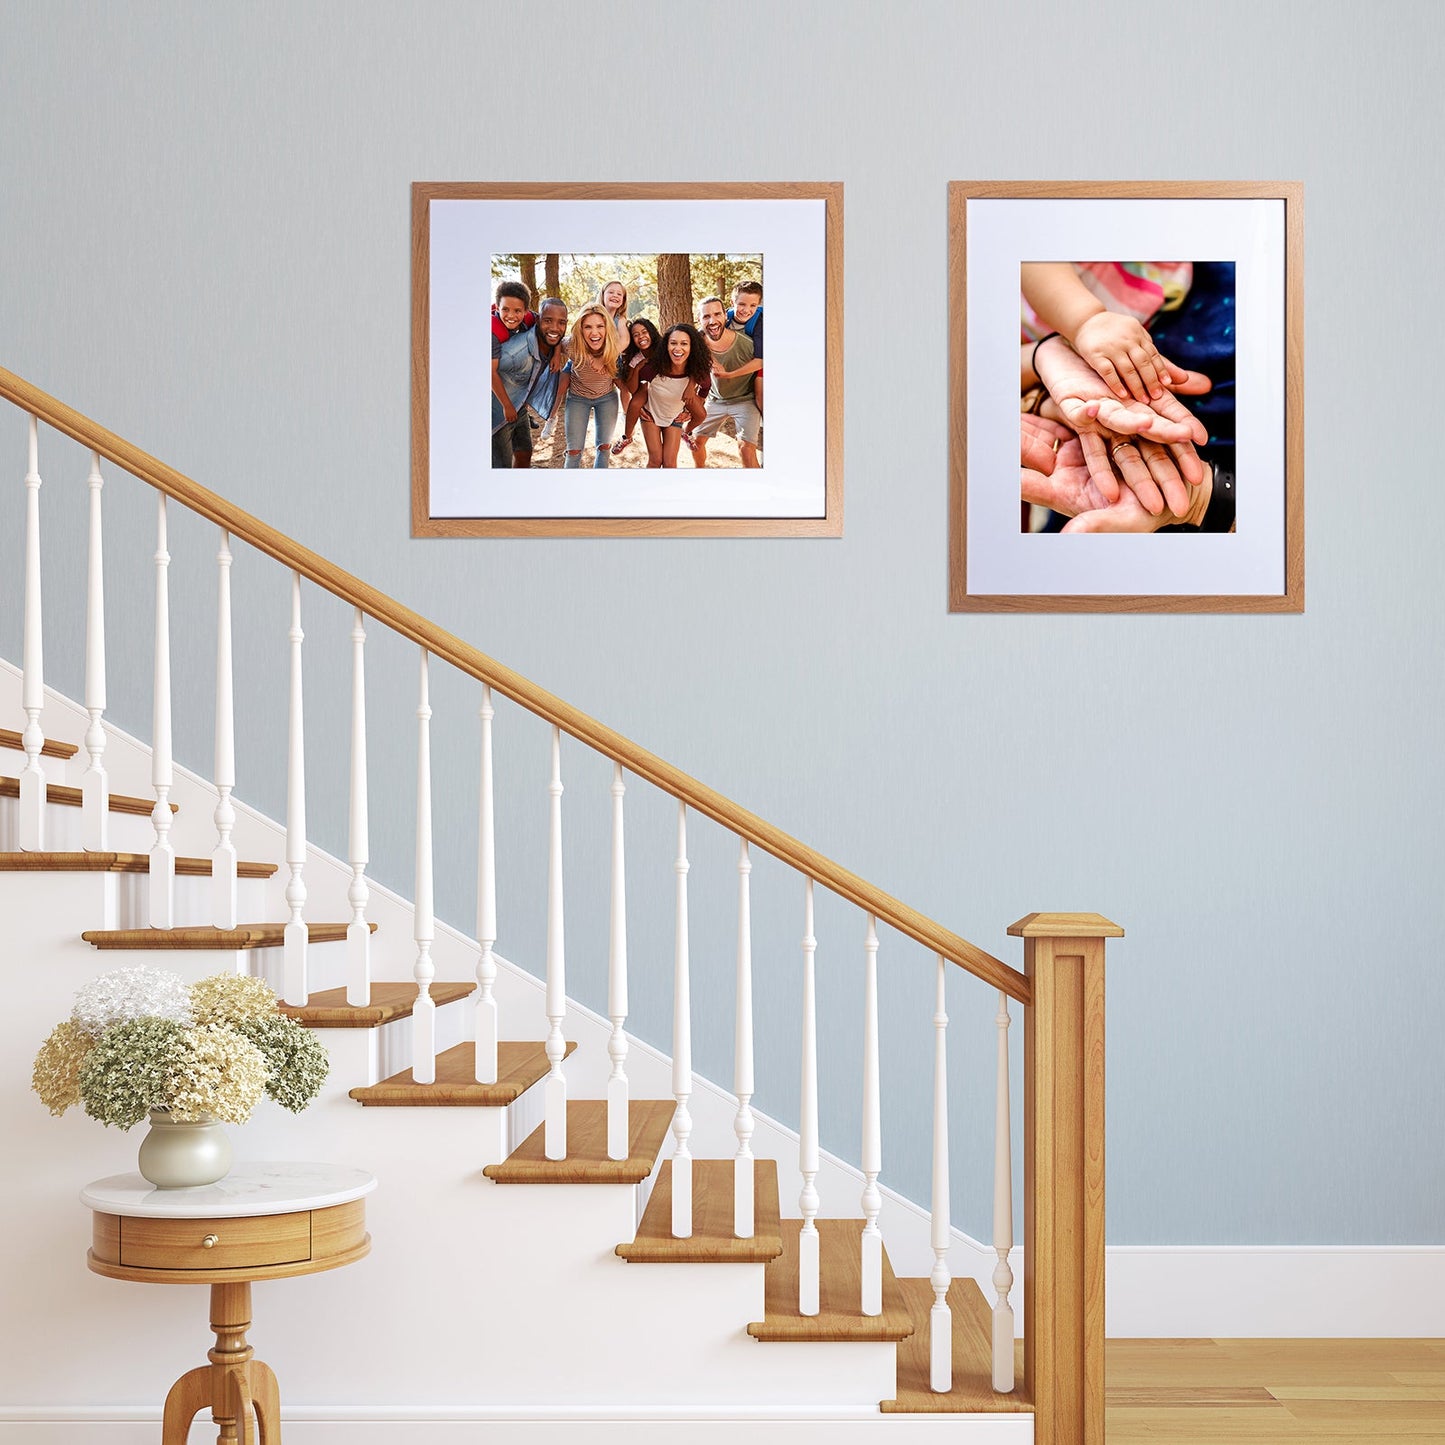 16" x 20” Classic Light Oak Wood Picture Frame with Tempered Glass, 11" x 14" Matted